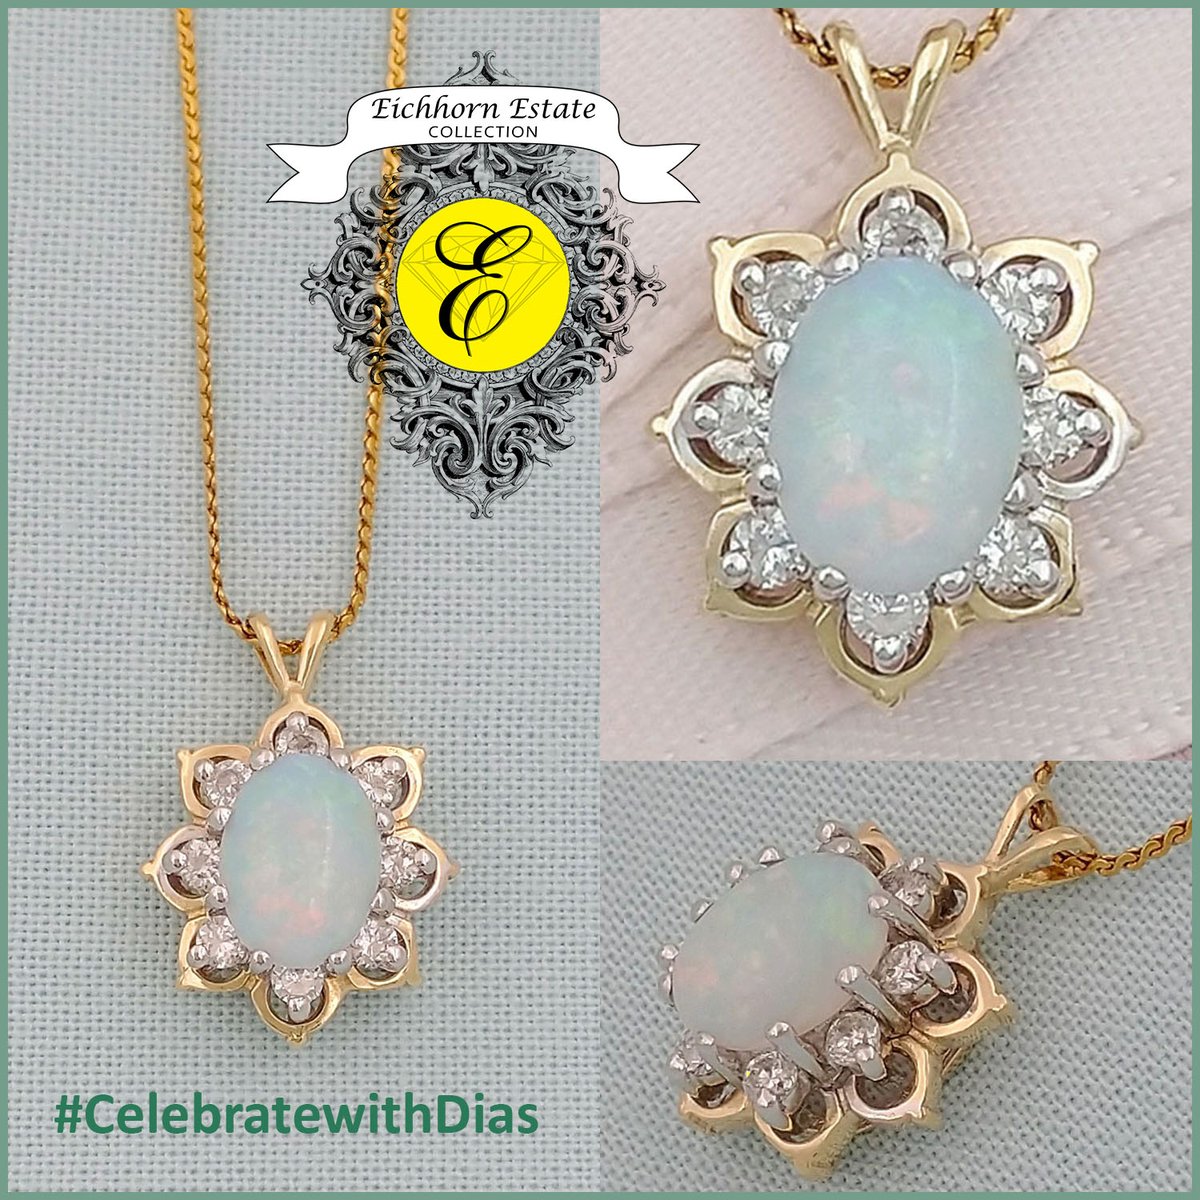 14KY gold Pendant with an 8mm x 6mm oval Opal and 8 round brilliant-cut Diamonds on an 18' chain. From Our Estate Collection $1,000. eichhornjewelry.com/estate-collect… #start2sparkle #alwaysthinkDIAMONDS #eichhornglow #1diamondatatime #CelebratewithDias #ColorWithYourDias #estatejewelry